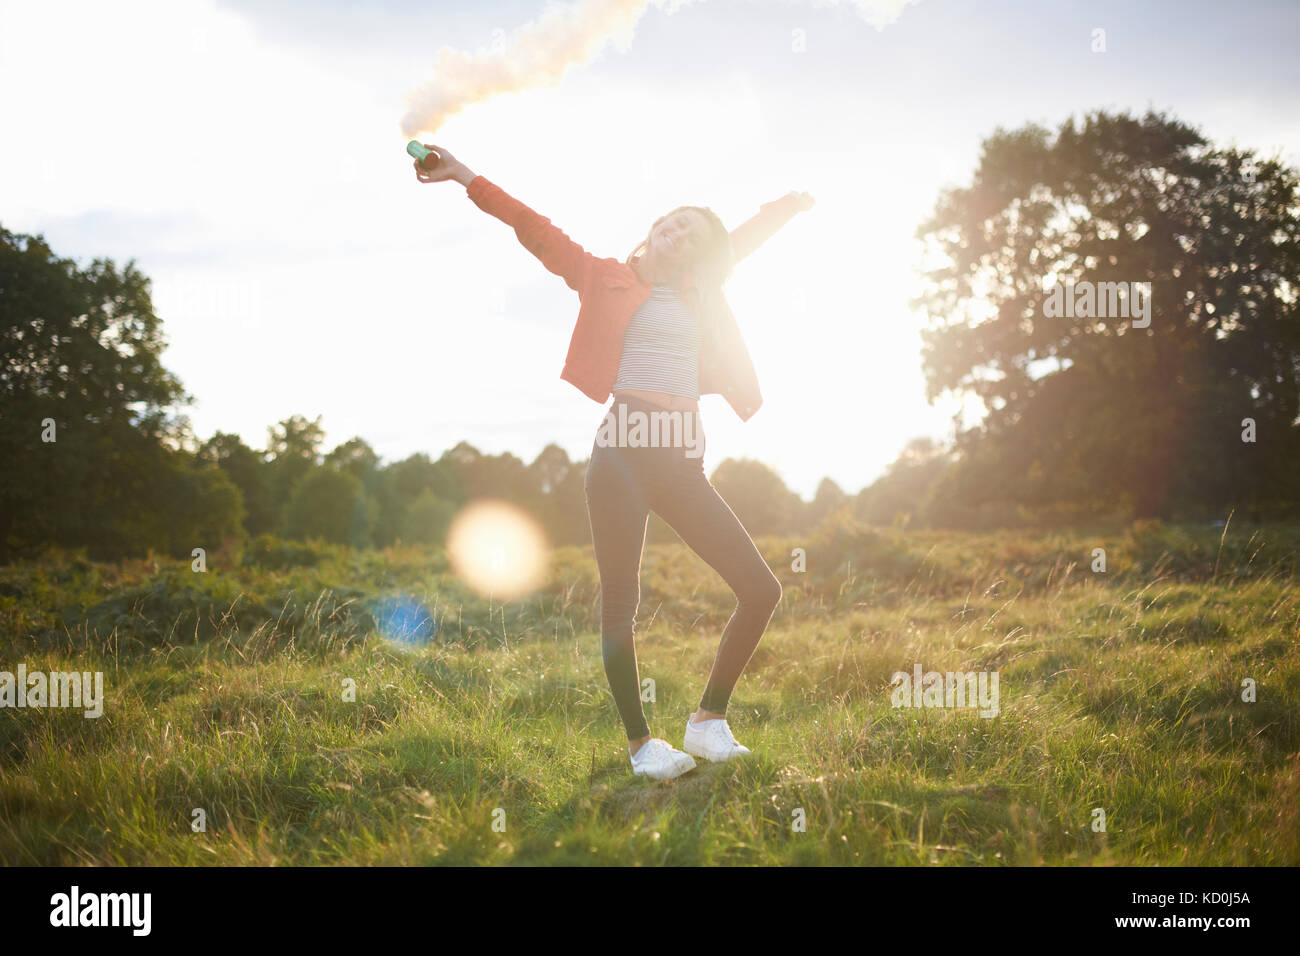 Young woman letting off smoke flare in sunlit field Stock Photo